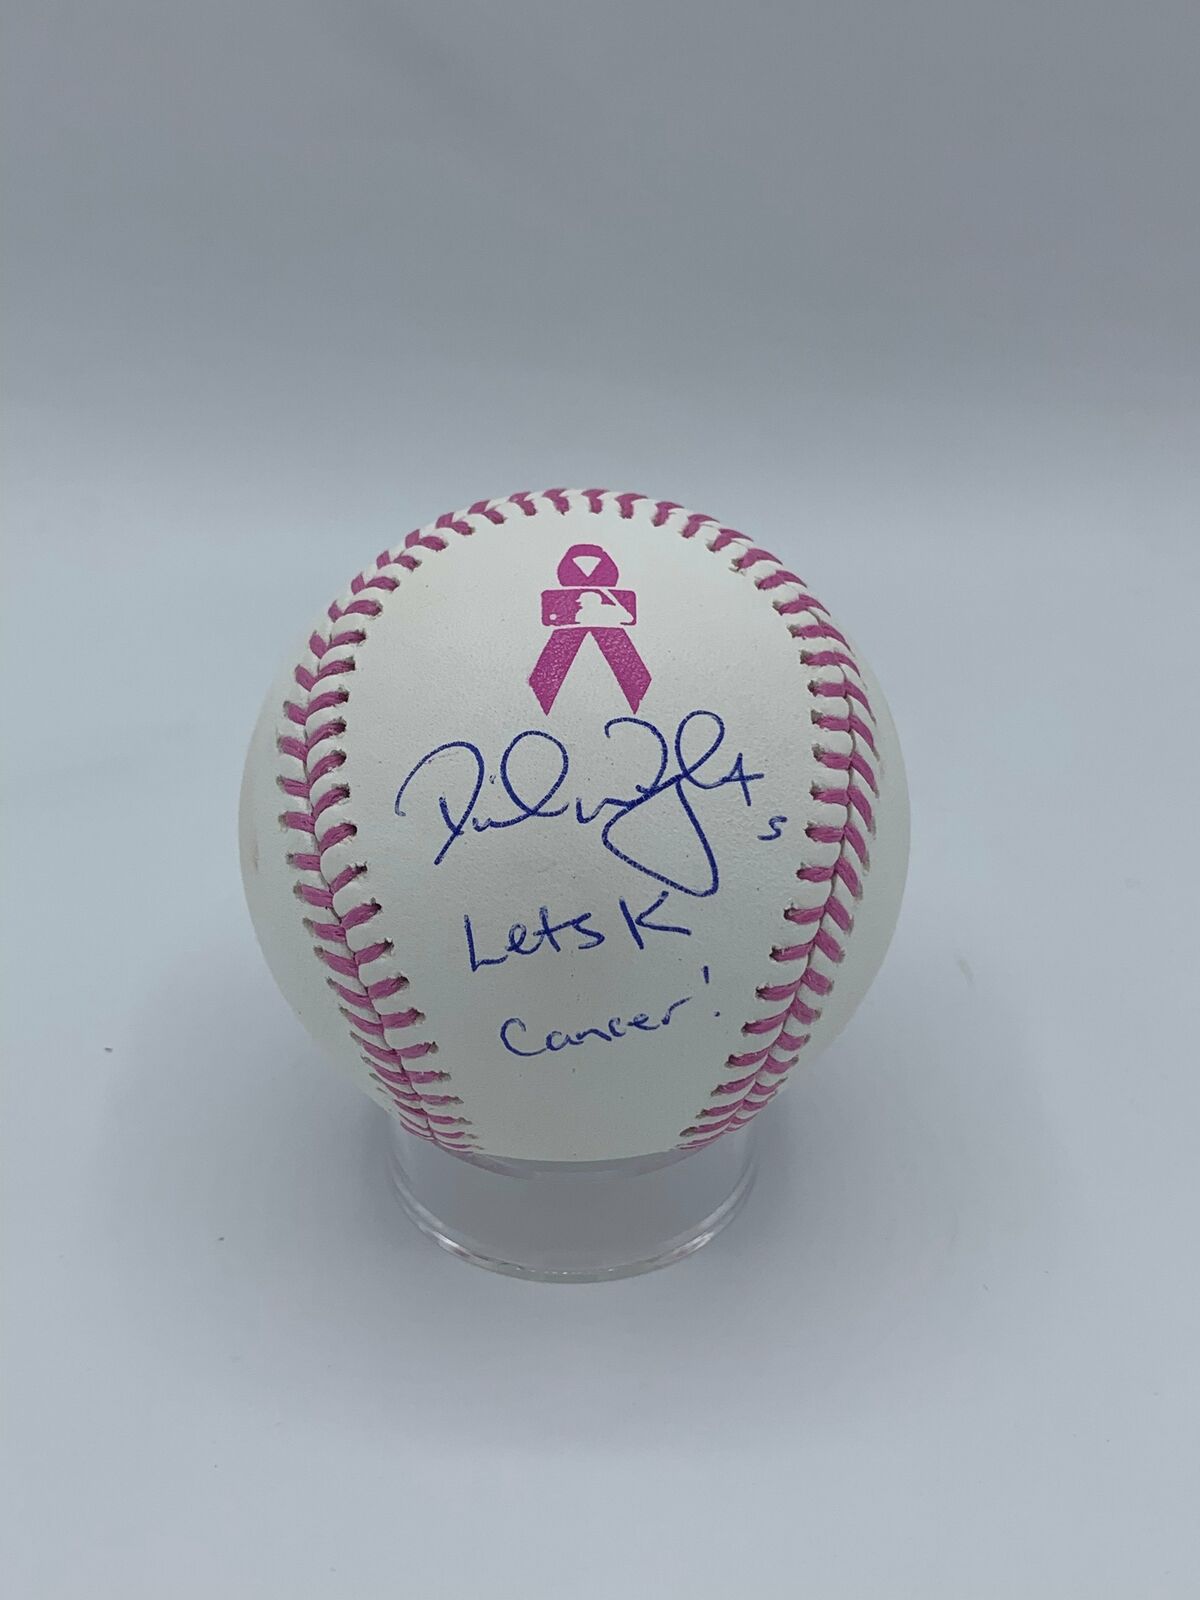 David Wright Autographed Mother\'s Day Baseball with Lets K Cancer Inscription (J